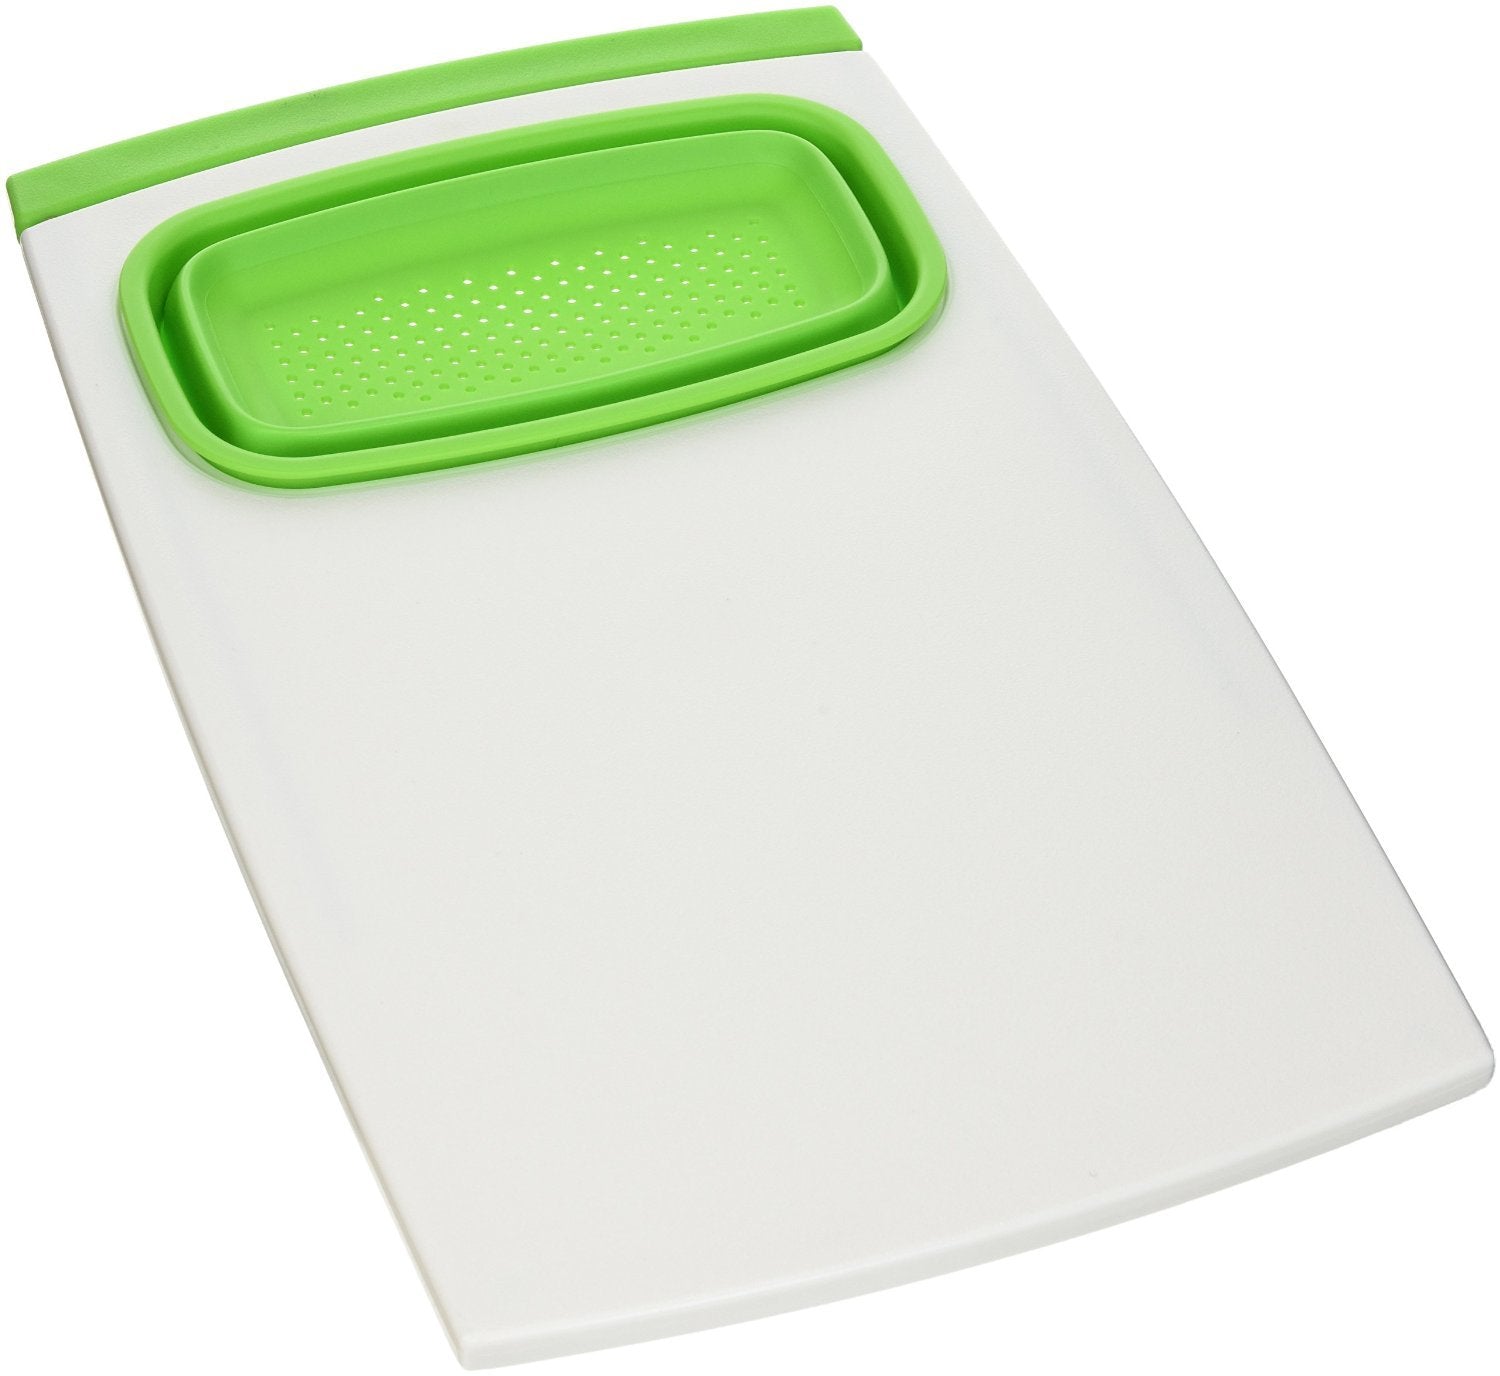 Prepworks by Progressive Over-the-Sink Cutting Board, PCB-3510G, Removable Collapsible Colander, Non-Skid Feet, Dishwasher Safe, Patented